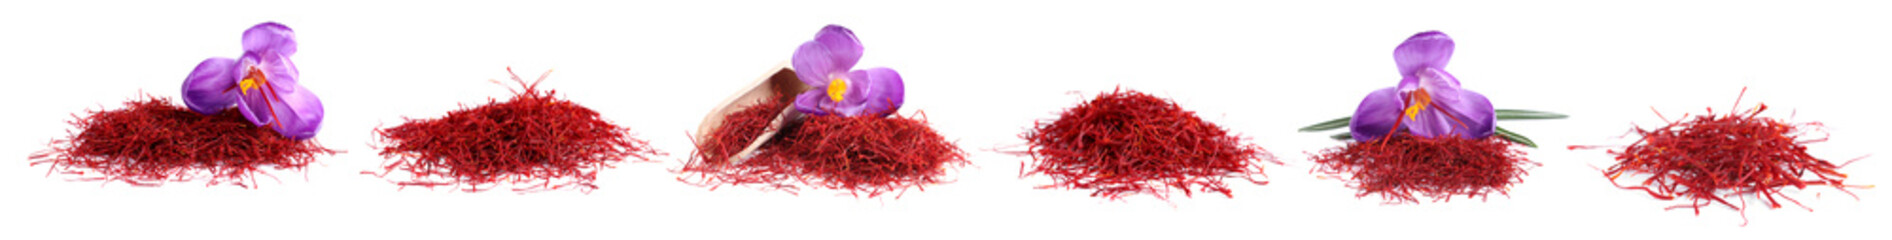 Set with dried saffron and crocus flowers on white background. Banner design